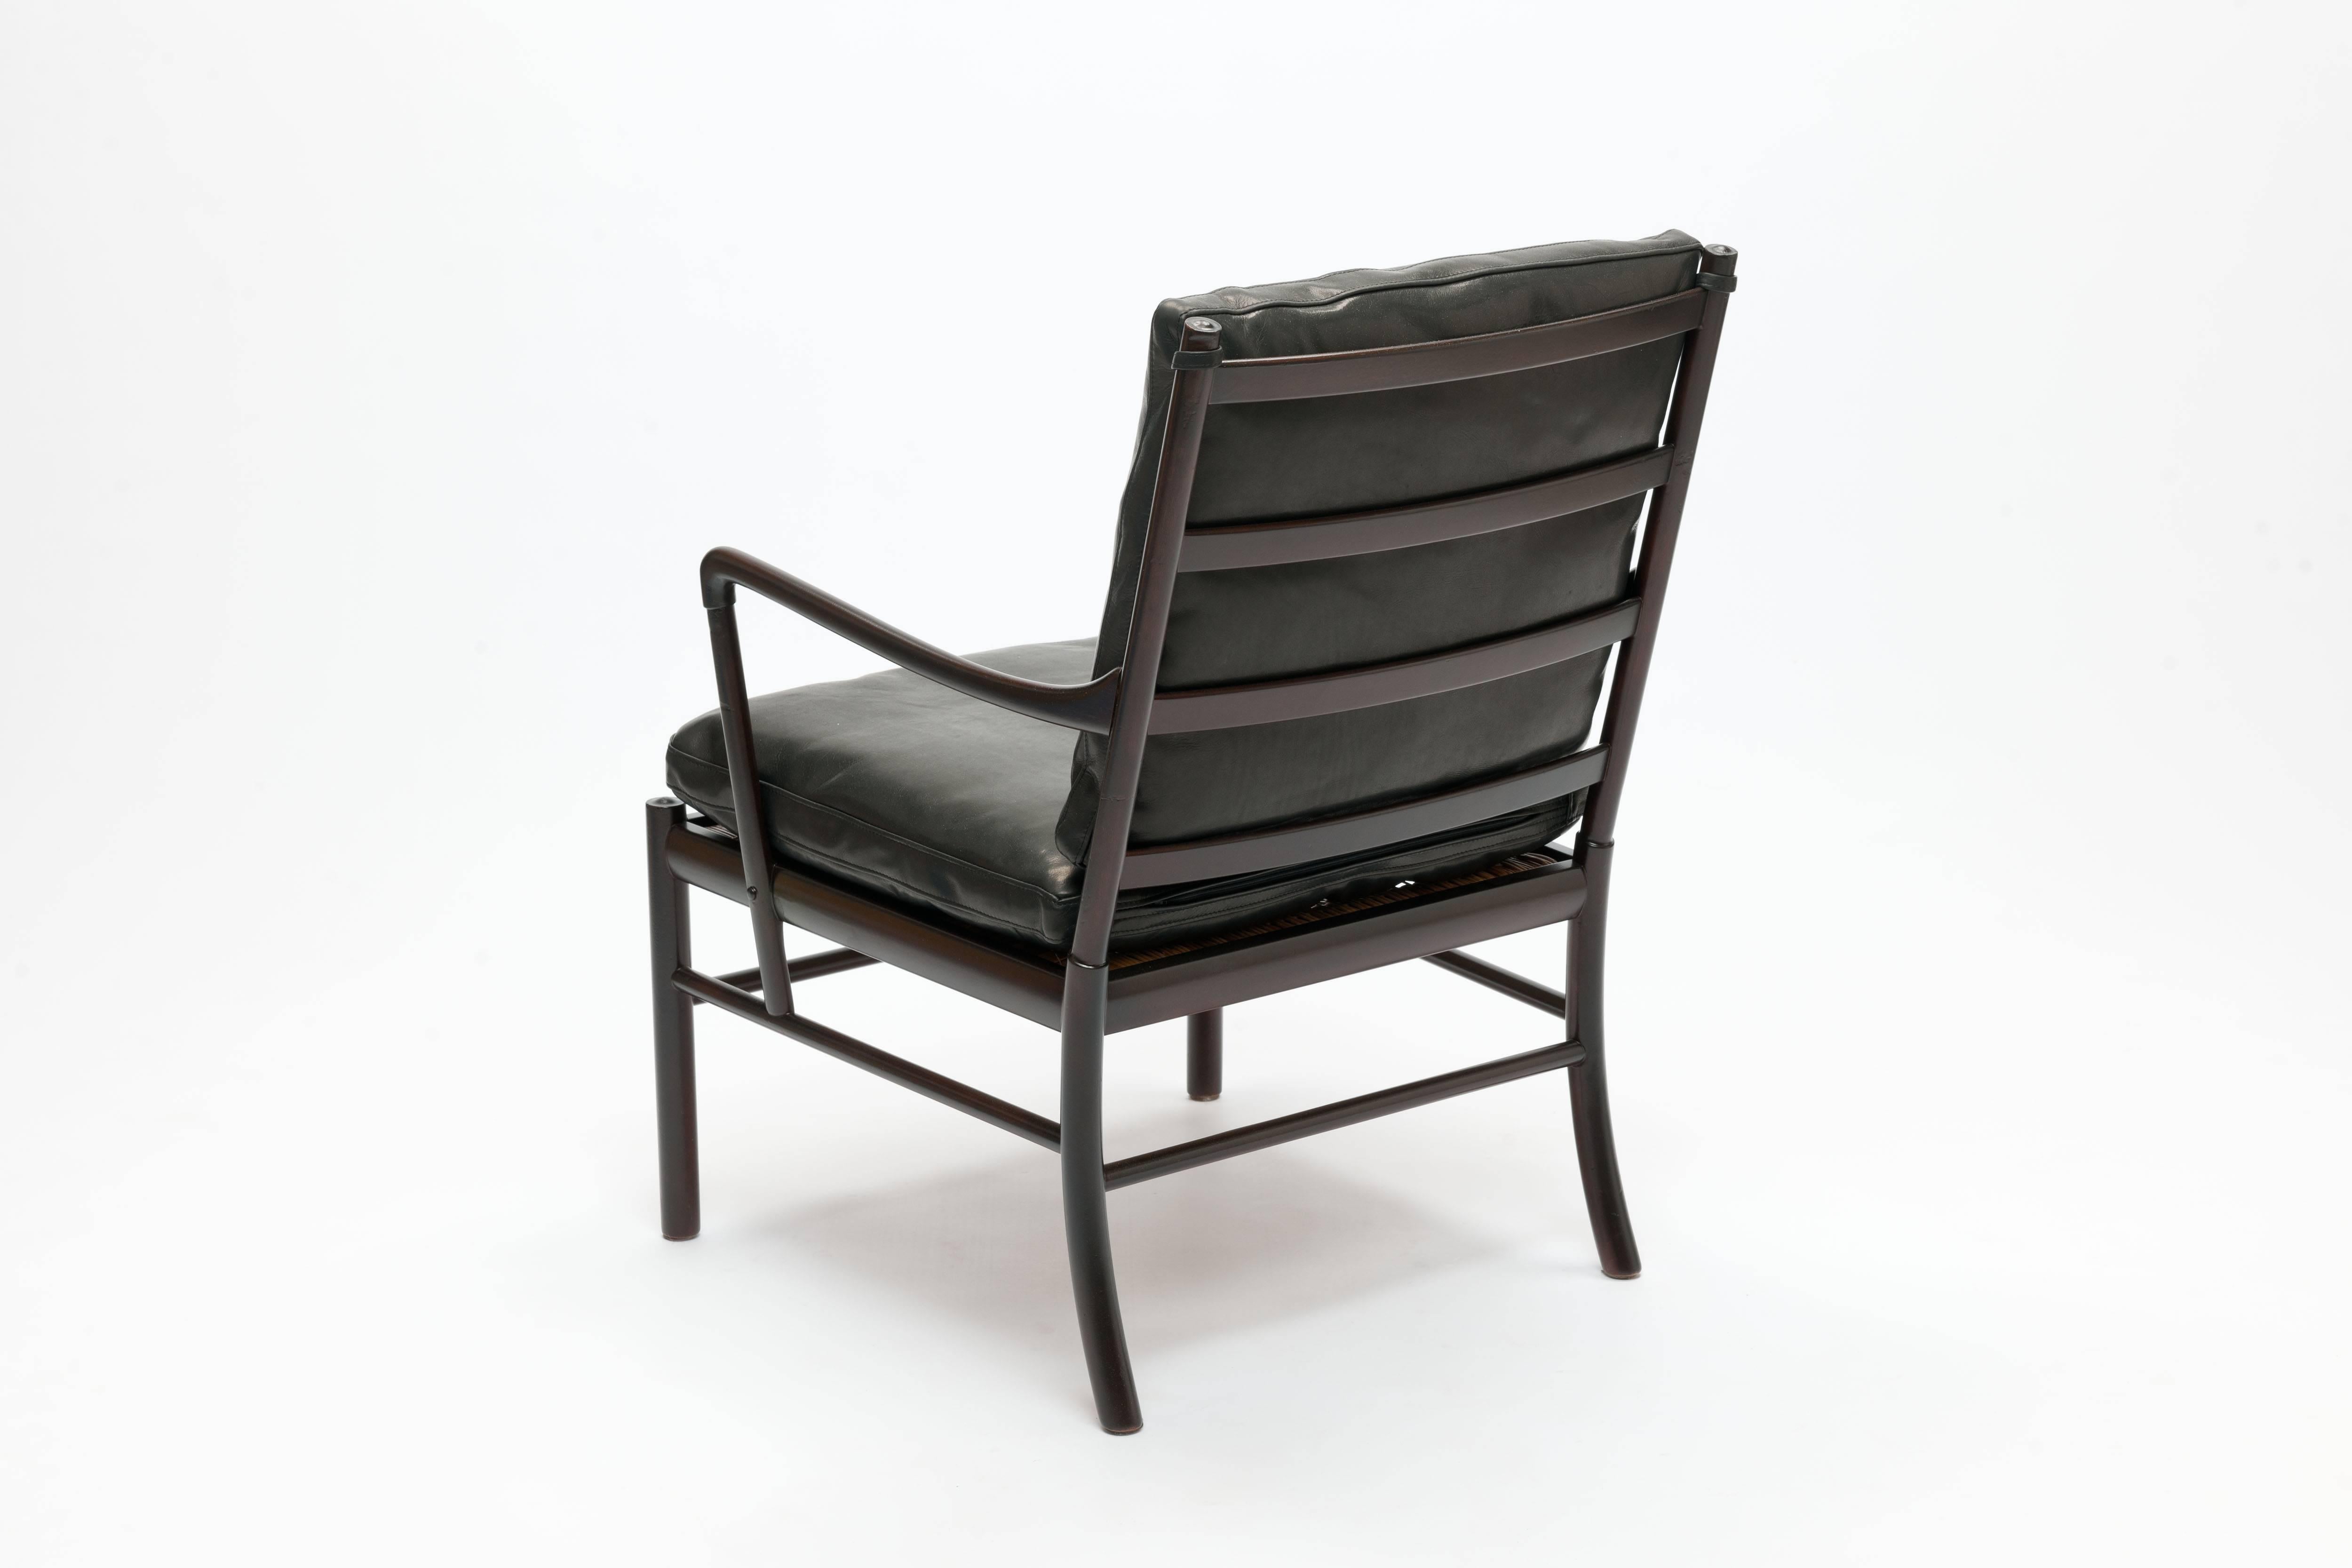 Mid-20th Century Black Leather Ole Wanscher Colonial Chair by Poul Jeppesen, Denmark